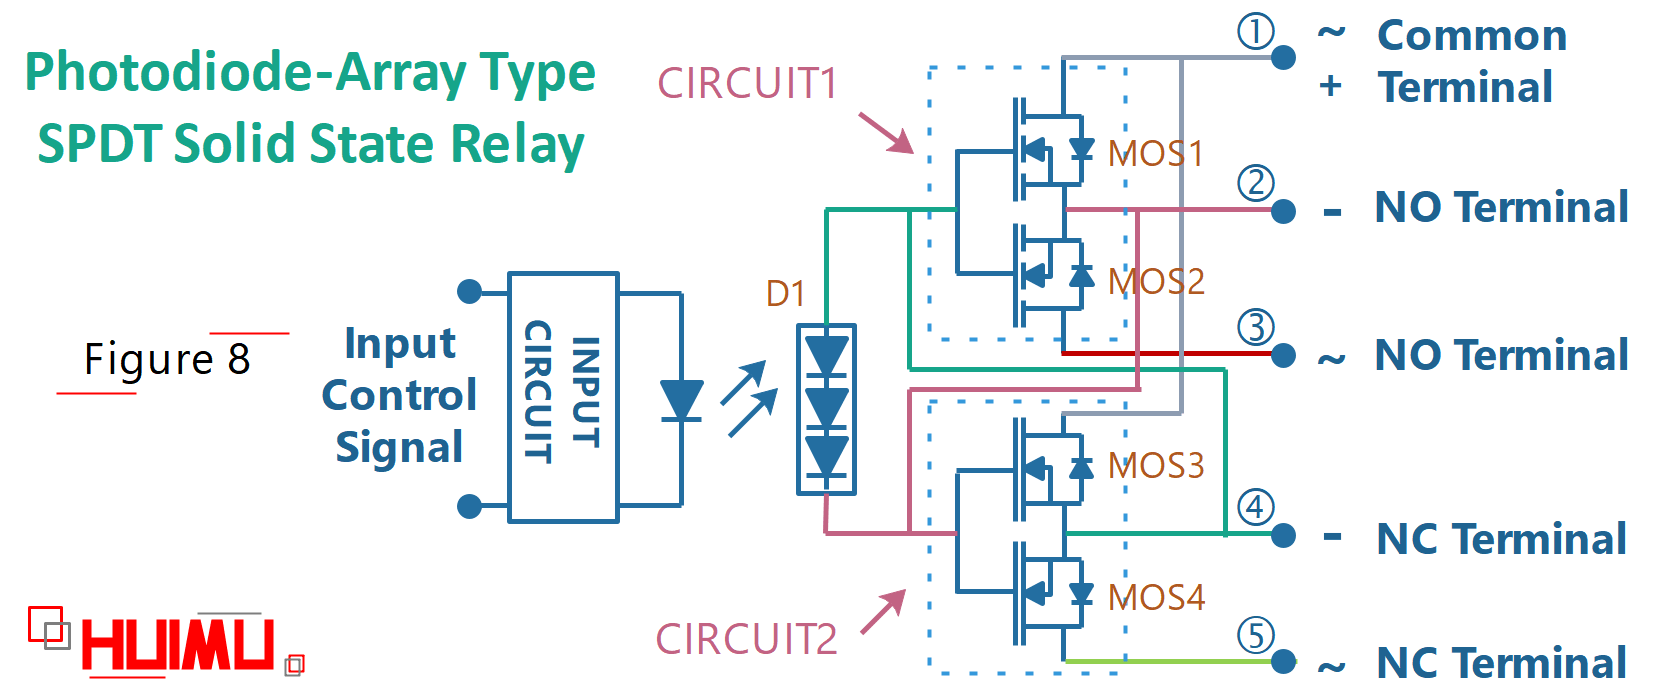 photodiode-array SPDT solid state relay circuit diagram